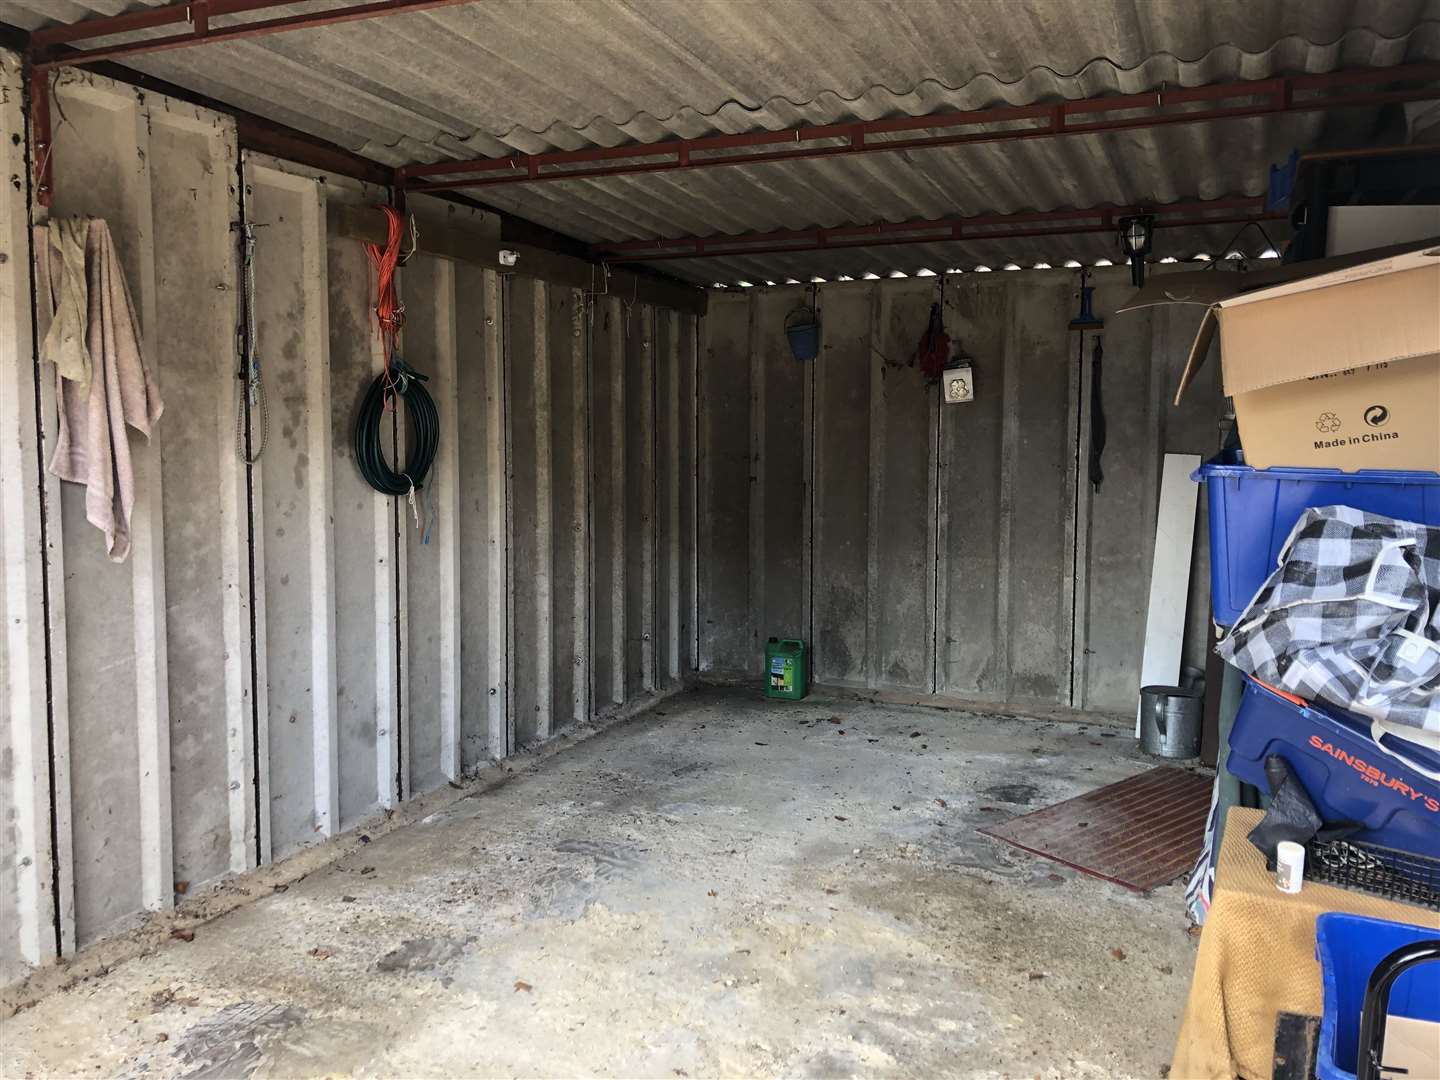 Her garage has laid empty for five months